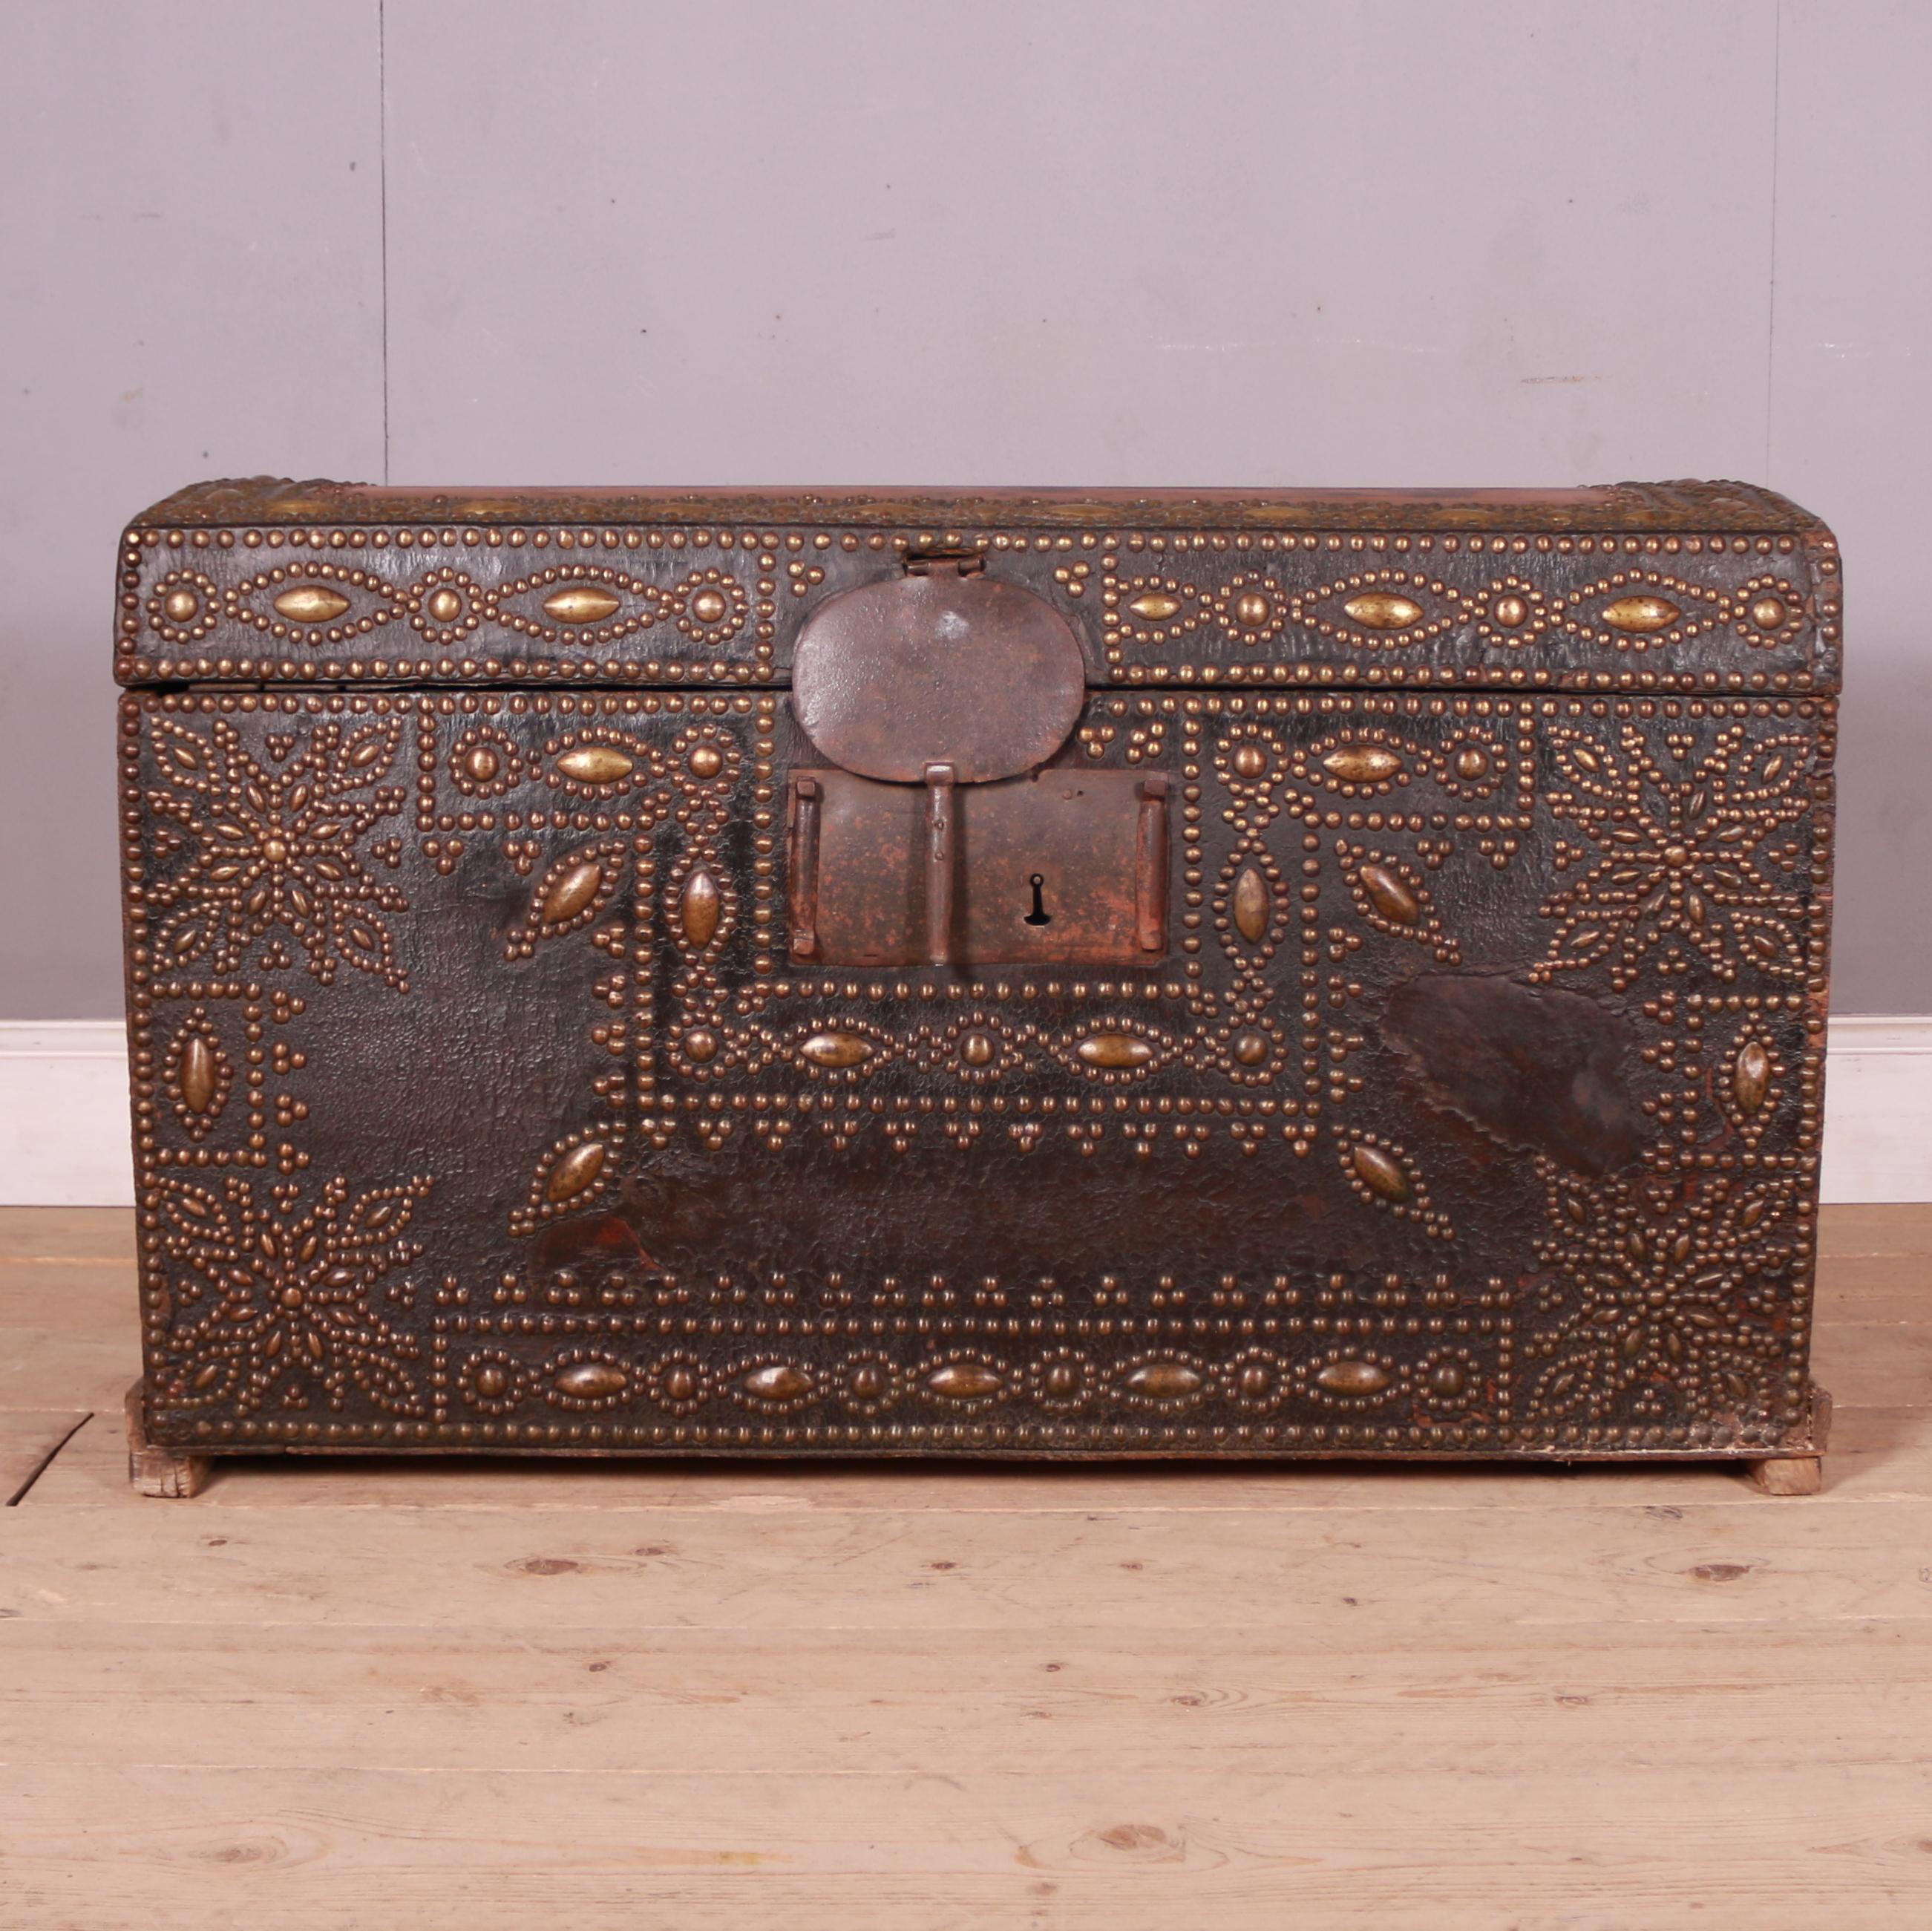 19th C dome top leather covered travel chest decorated with brass studs. 1850.

Reference: 7537

Dimensions
44.5 inches (113 cms) wide
21 inches (53 cms) deep
26 inches (66 cms) high.